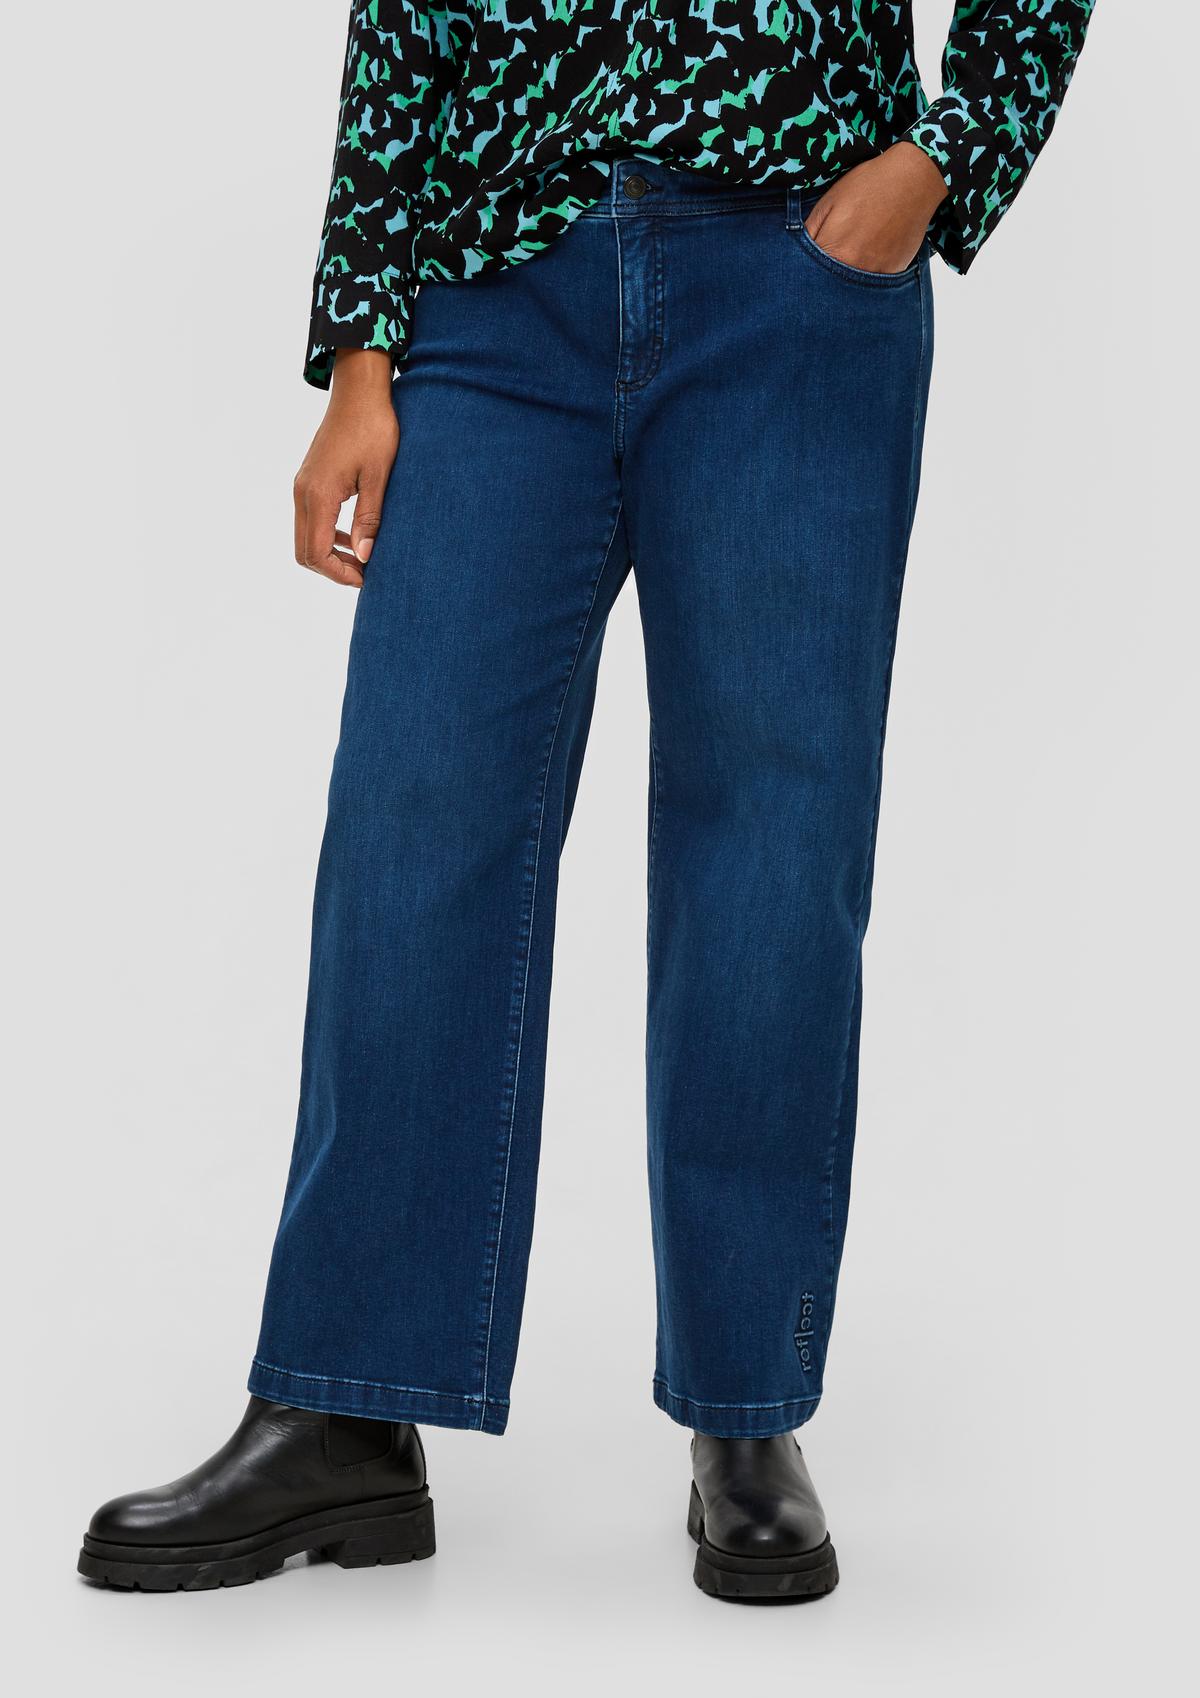 s.Oliver Jeans Straight / Mid Rise 